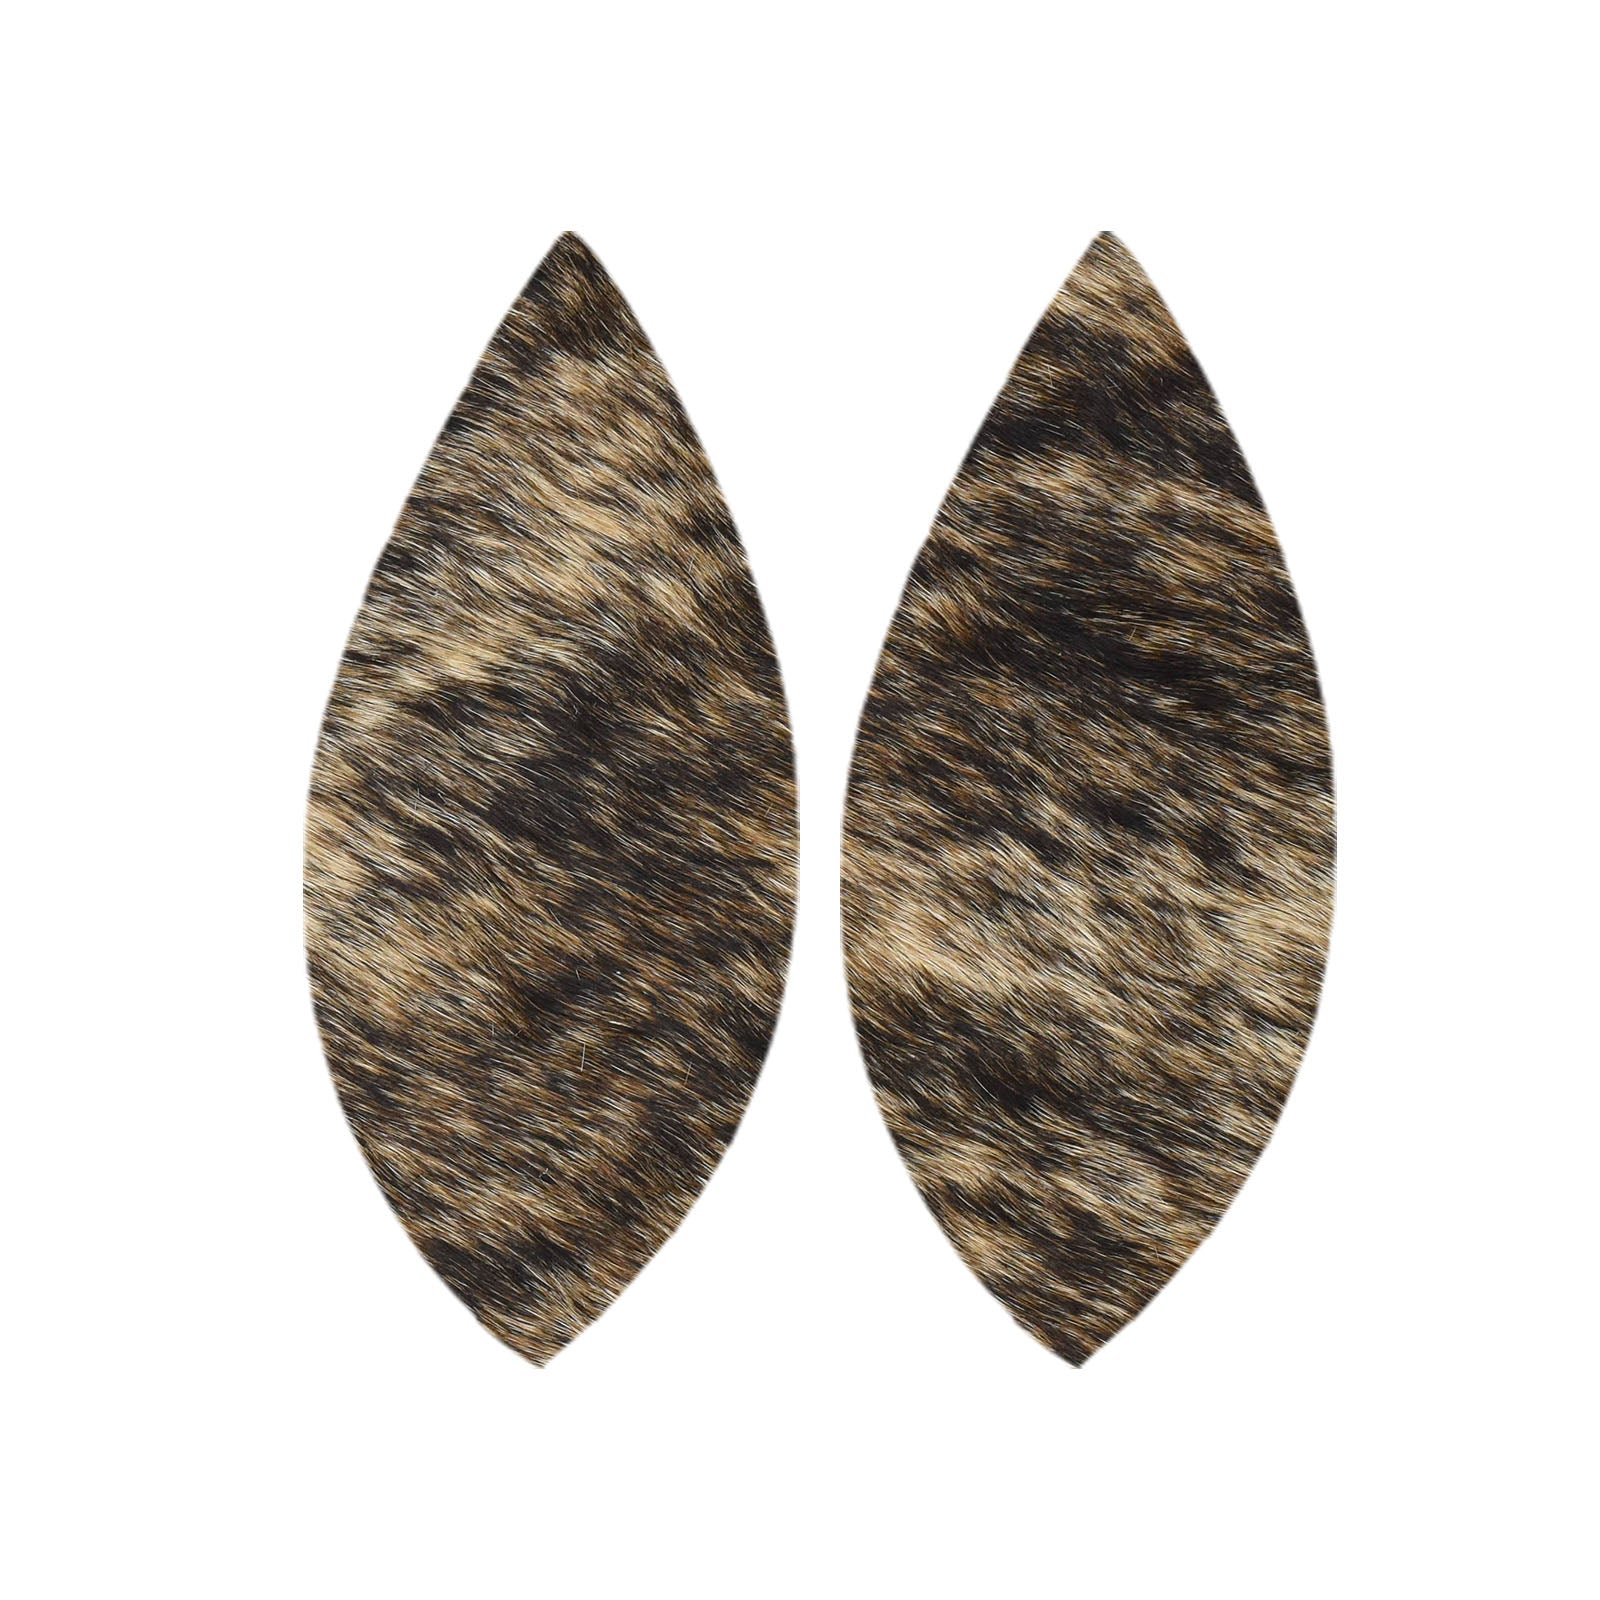 Light Brindle Light to Medium Brown, Black, and Off-White Hair On Die Cut Earrings, Feather | The Leather Guy